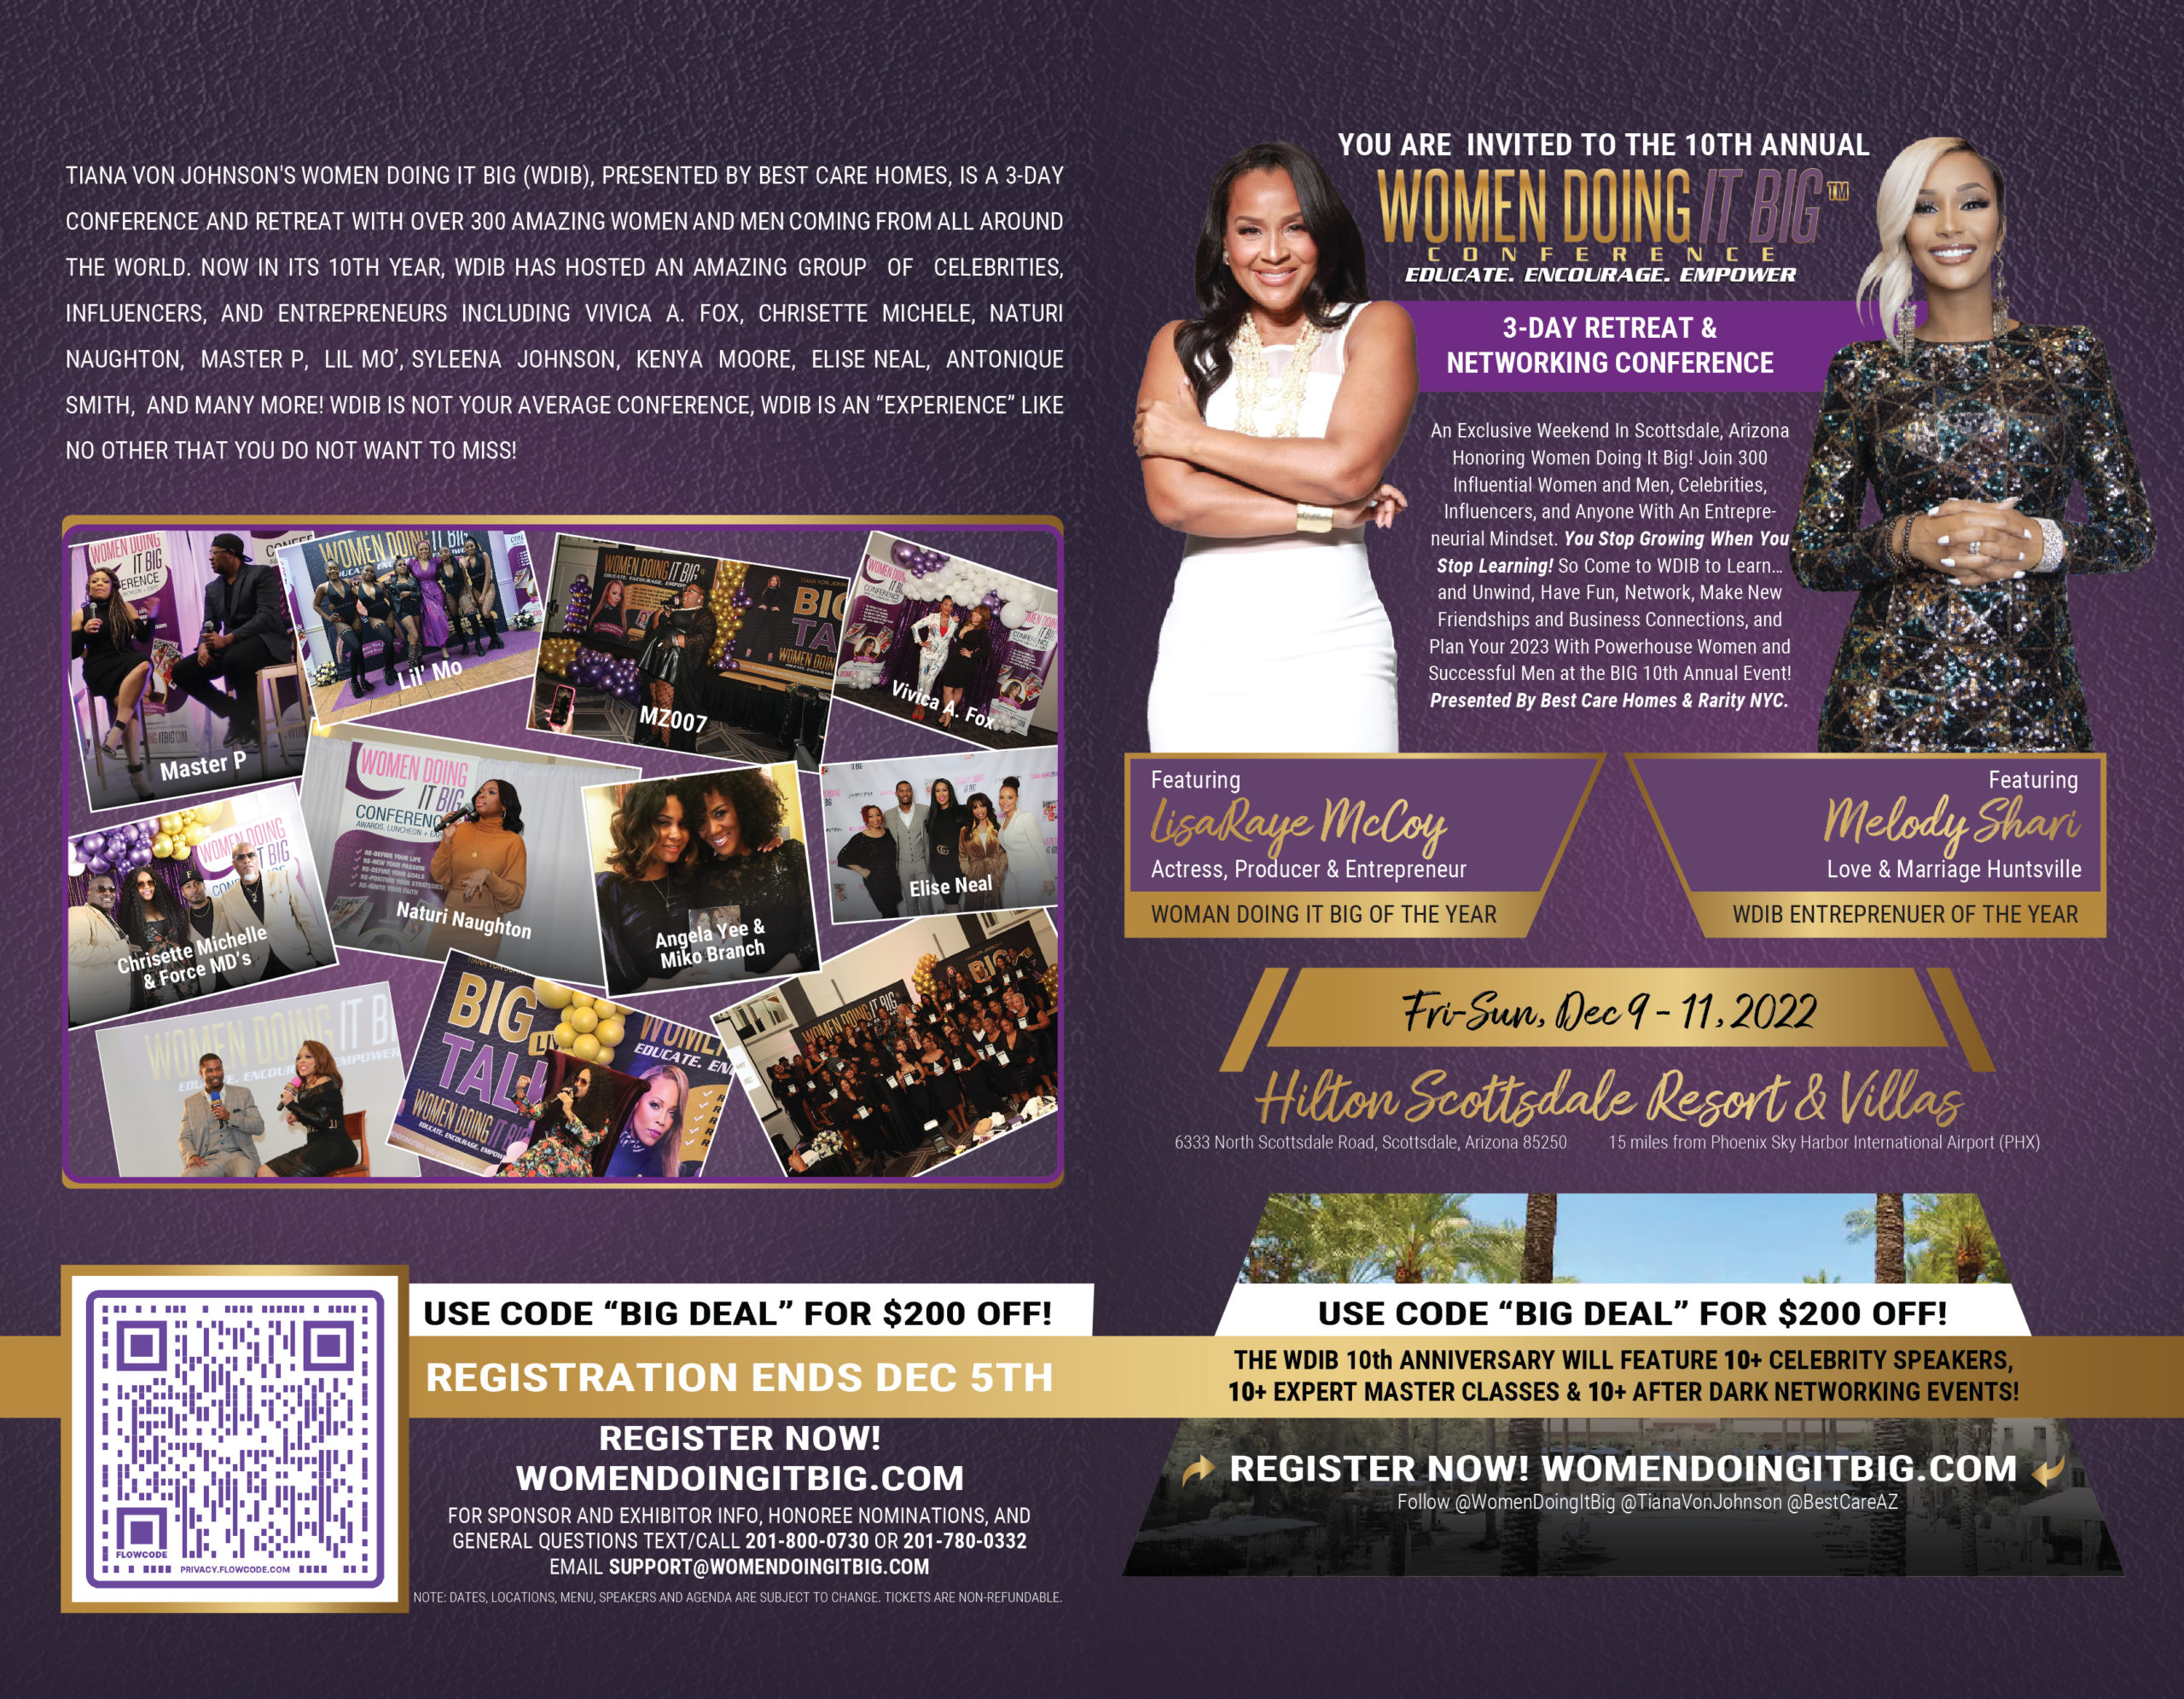 Women Doing It Big Retreat & Conference Featuring LisaRaye McCoy in Scottsdale on December 9-11